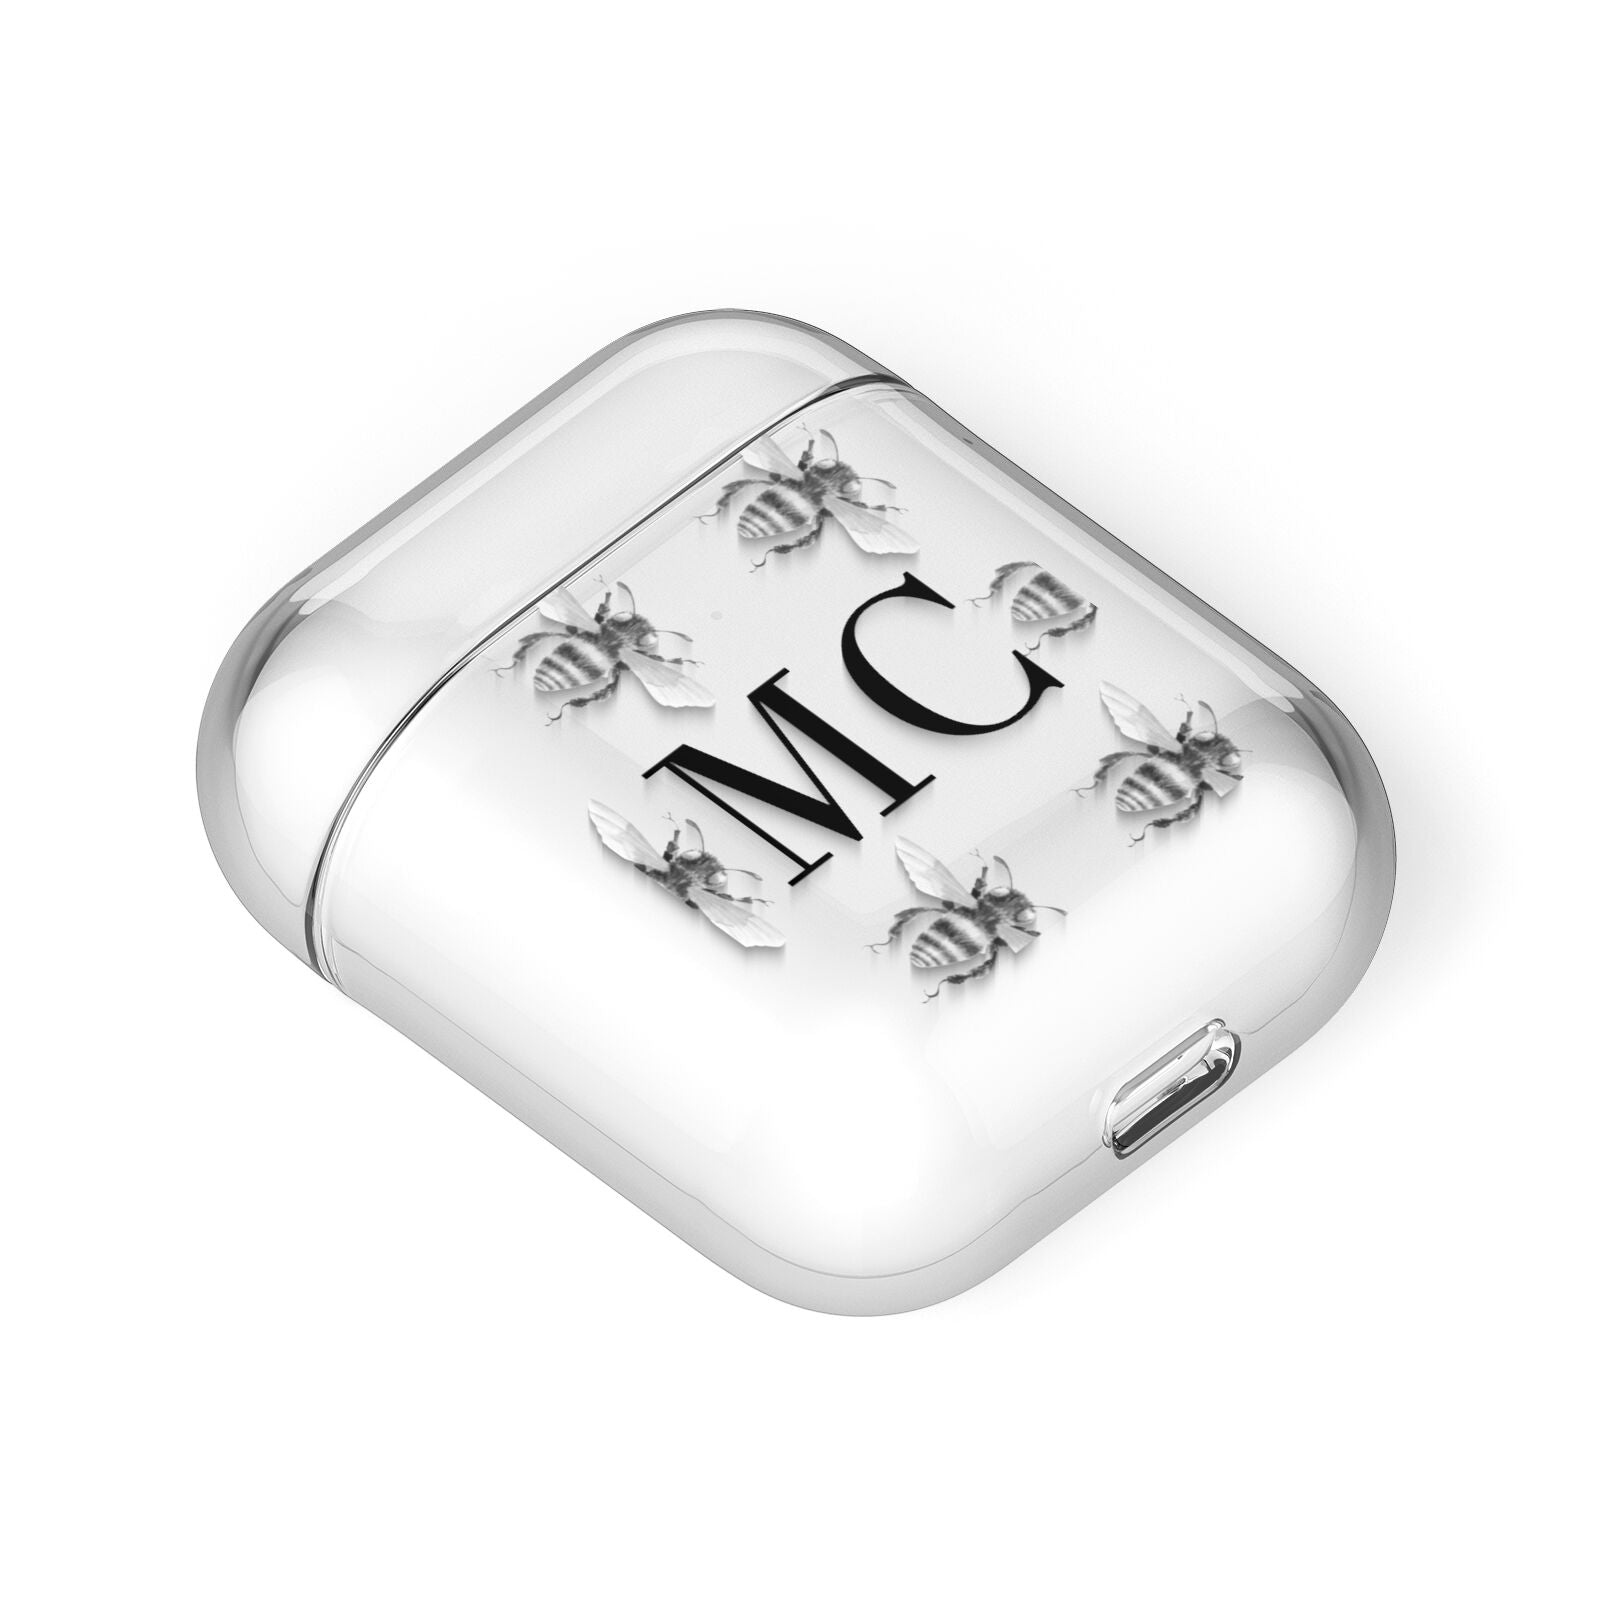 Monochrome Bees with Monogram AirPods Case Laid Flat